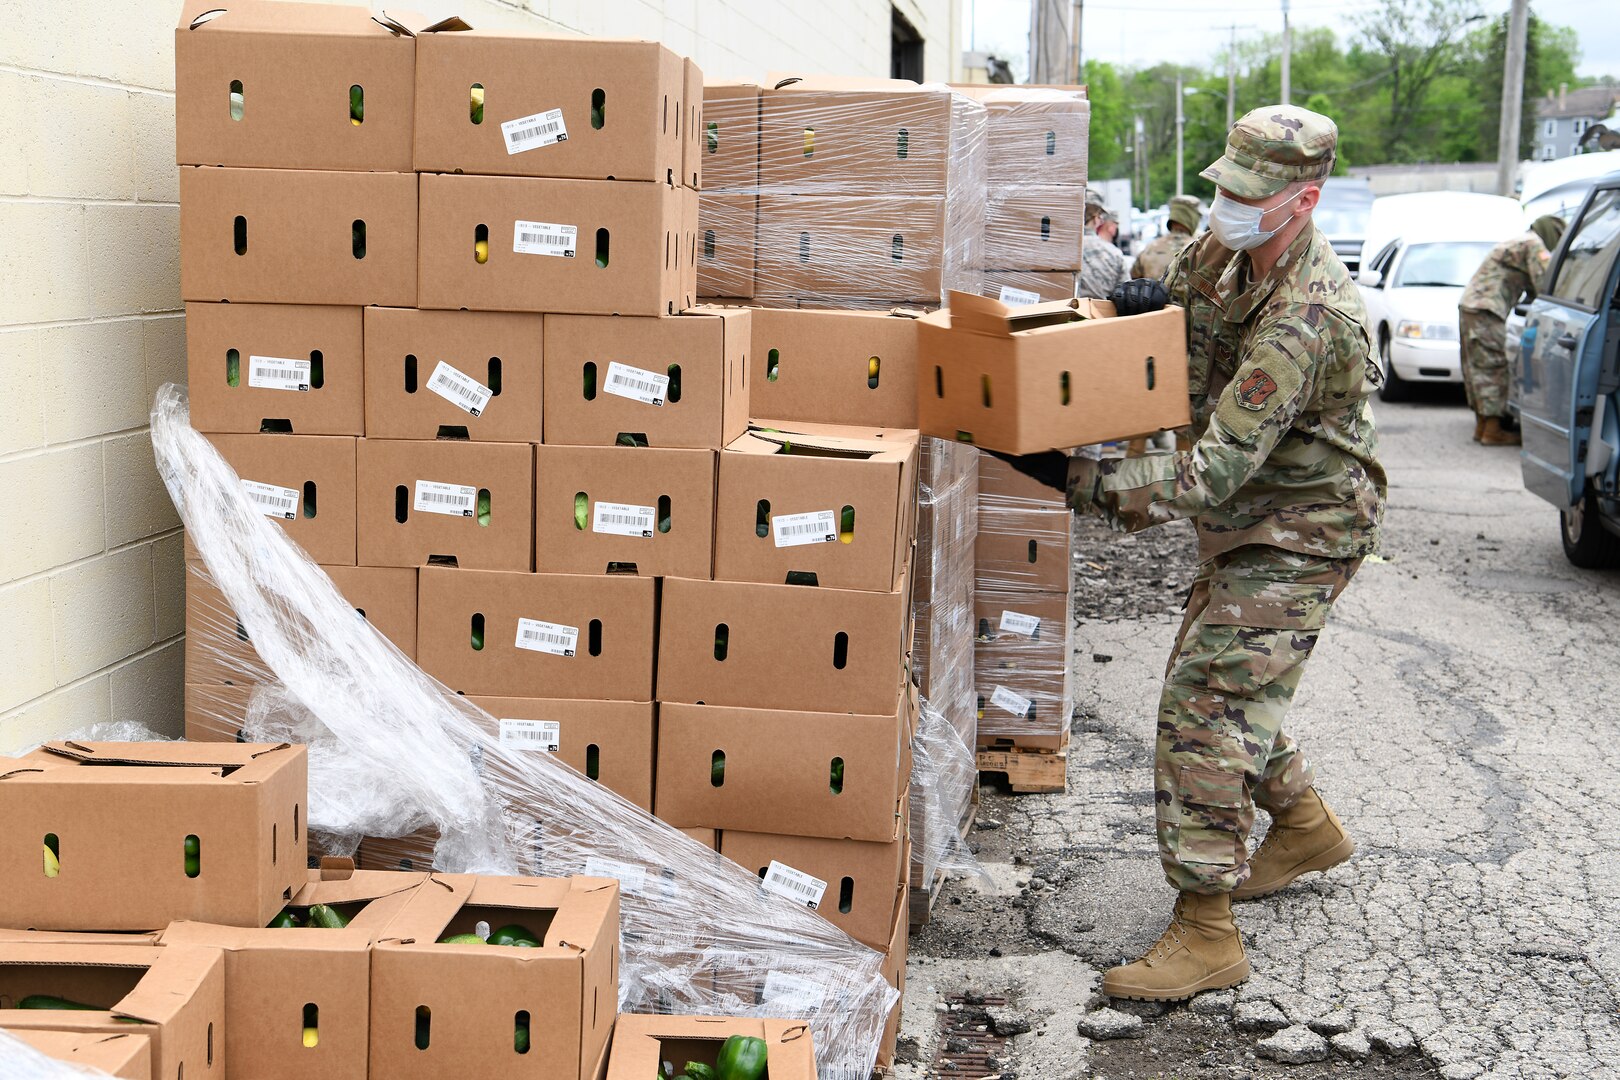 Staff Sgt. Lucas Williams, a radar technician assigned to the 123rd Air Control Squadron, Ohio National Guard, unwraps a pallet of boxes of food during the drive-thru food distribution May 22, 2020, at the Second Harvest Food Bank in Springfield, Ohio.